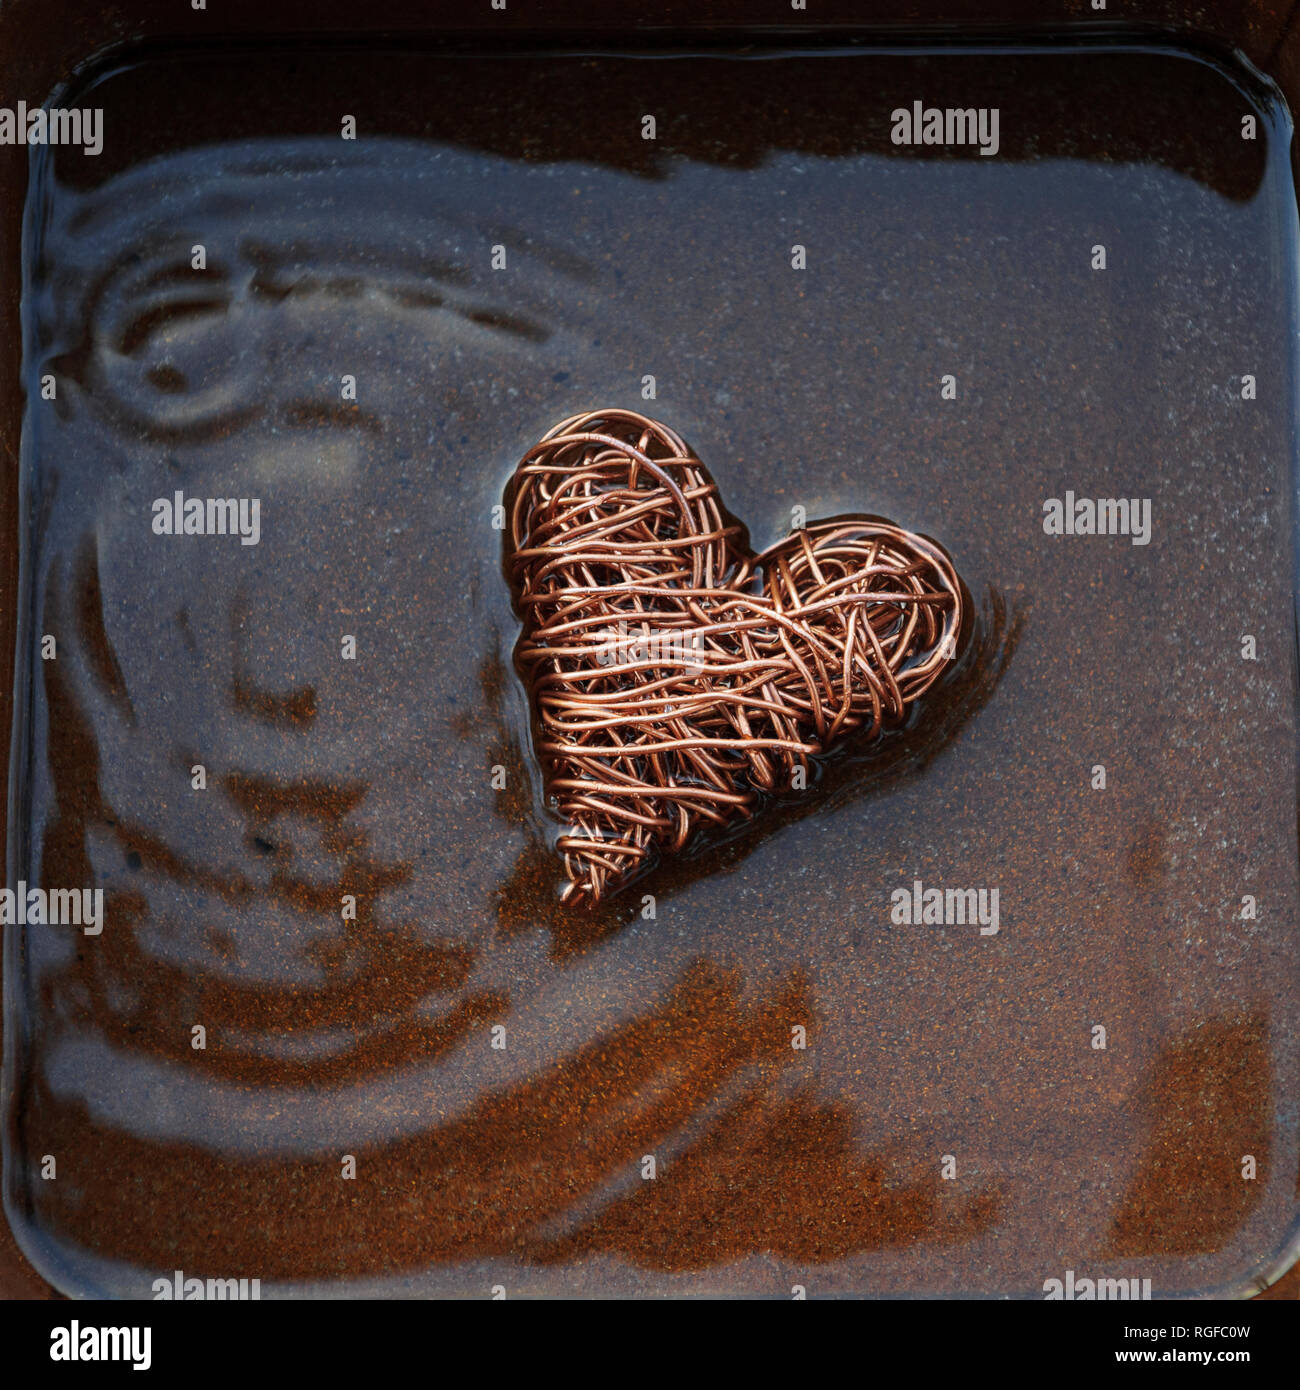 Heart made from copper wire in shallow water with concentric ripples caused by water droplets. Stock Photo